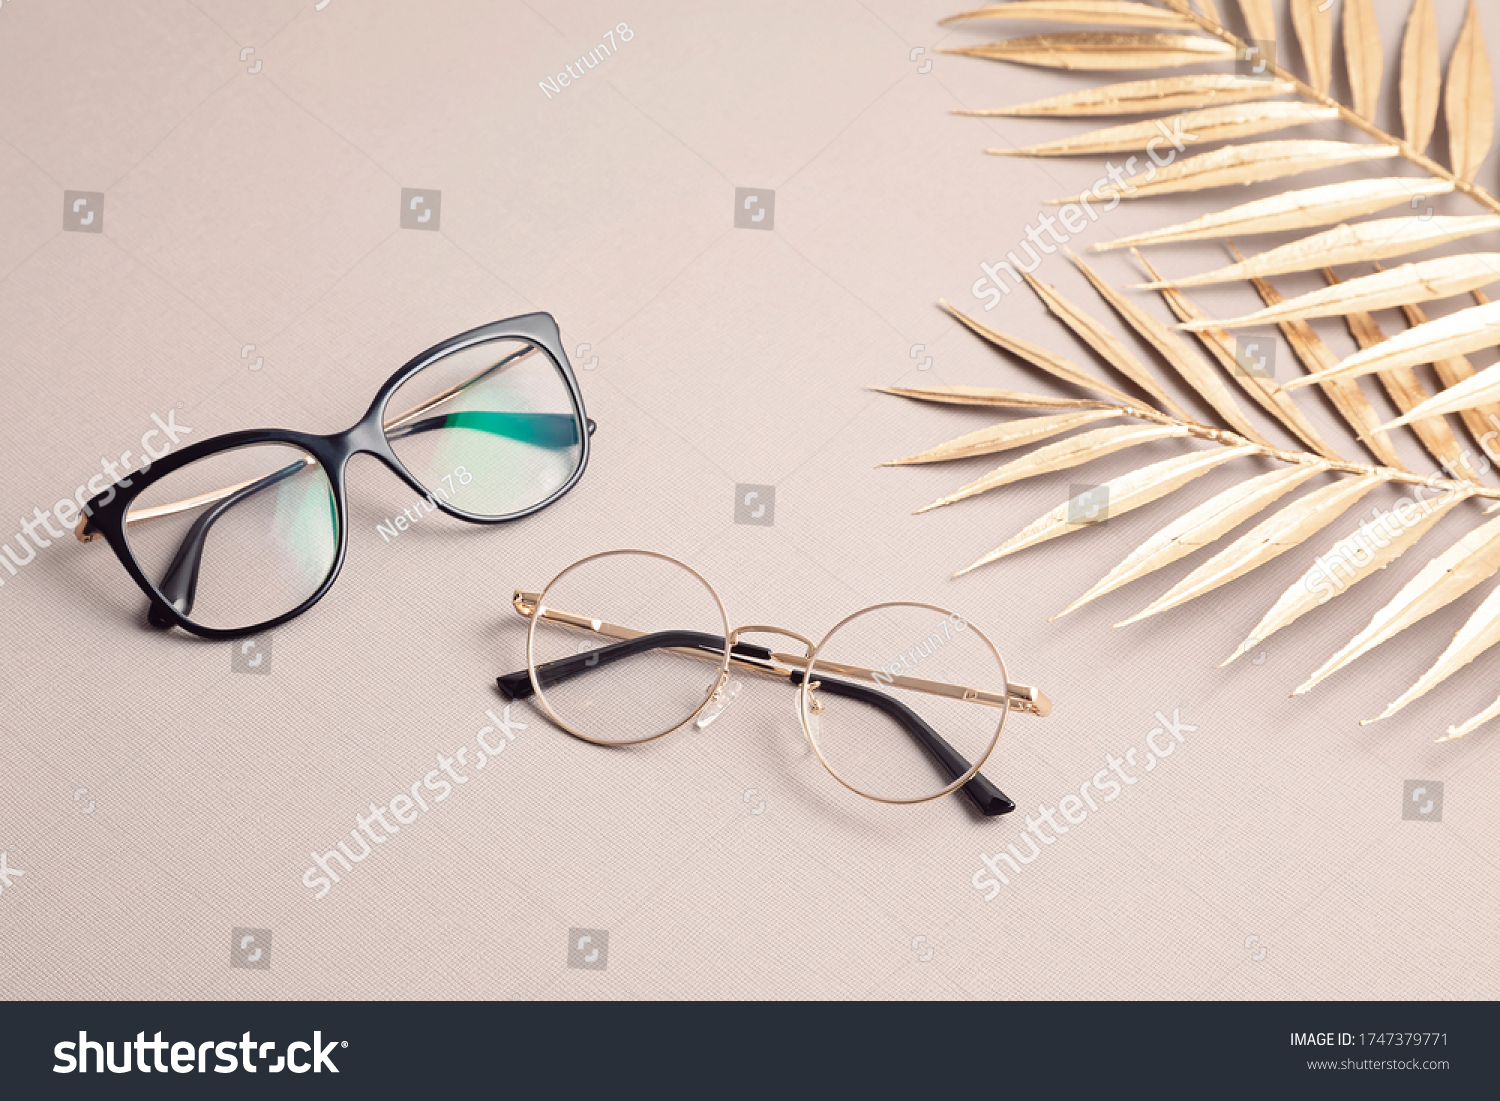 Stylish eyeglasses over pastel  background. Optical store, glasses selection, eye test, vision examination at optician, fashion accessories concept. Top view, flat lay #1747379771